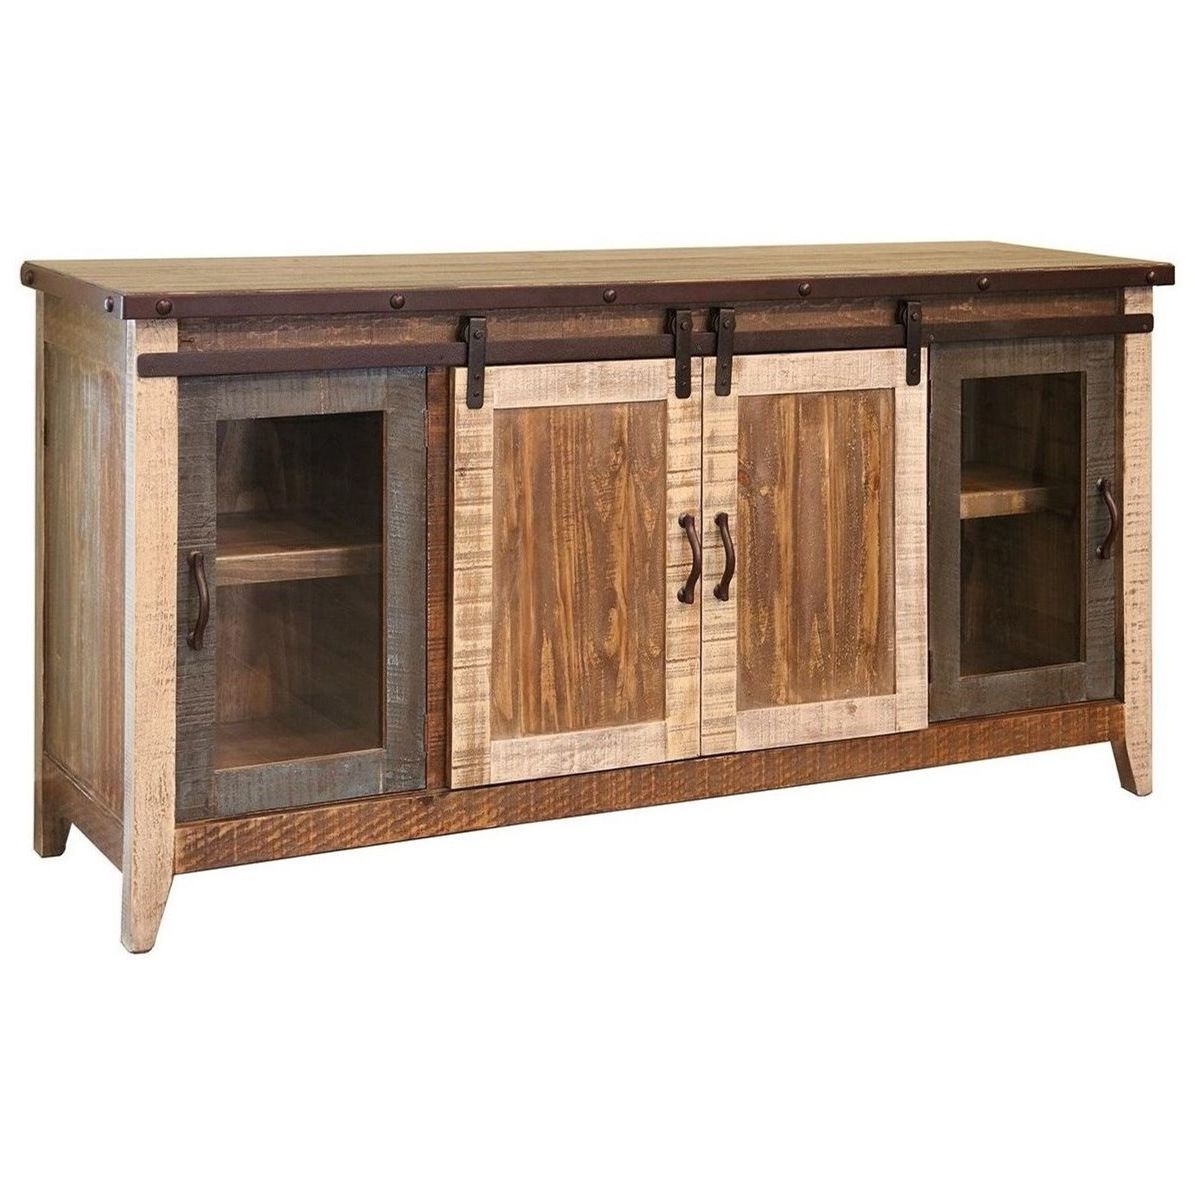 Recent Vfm Signature 900 Antique Rustic 70" Tv Stand With Sliding Within Robinson Rustic Farmhouse Sliding Barn Door Corner Tv Stands (Photo 10 of 10)